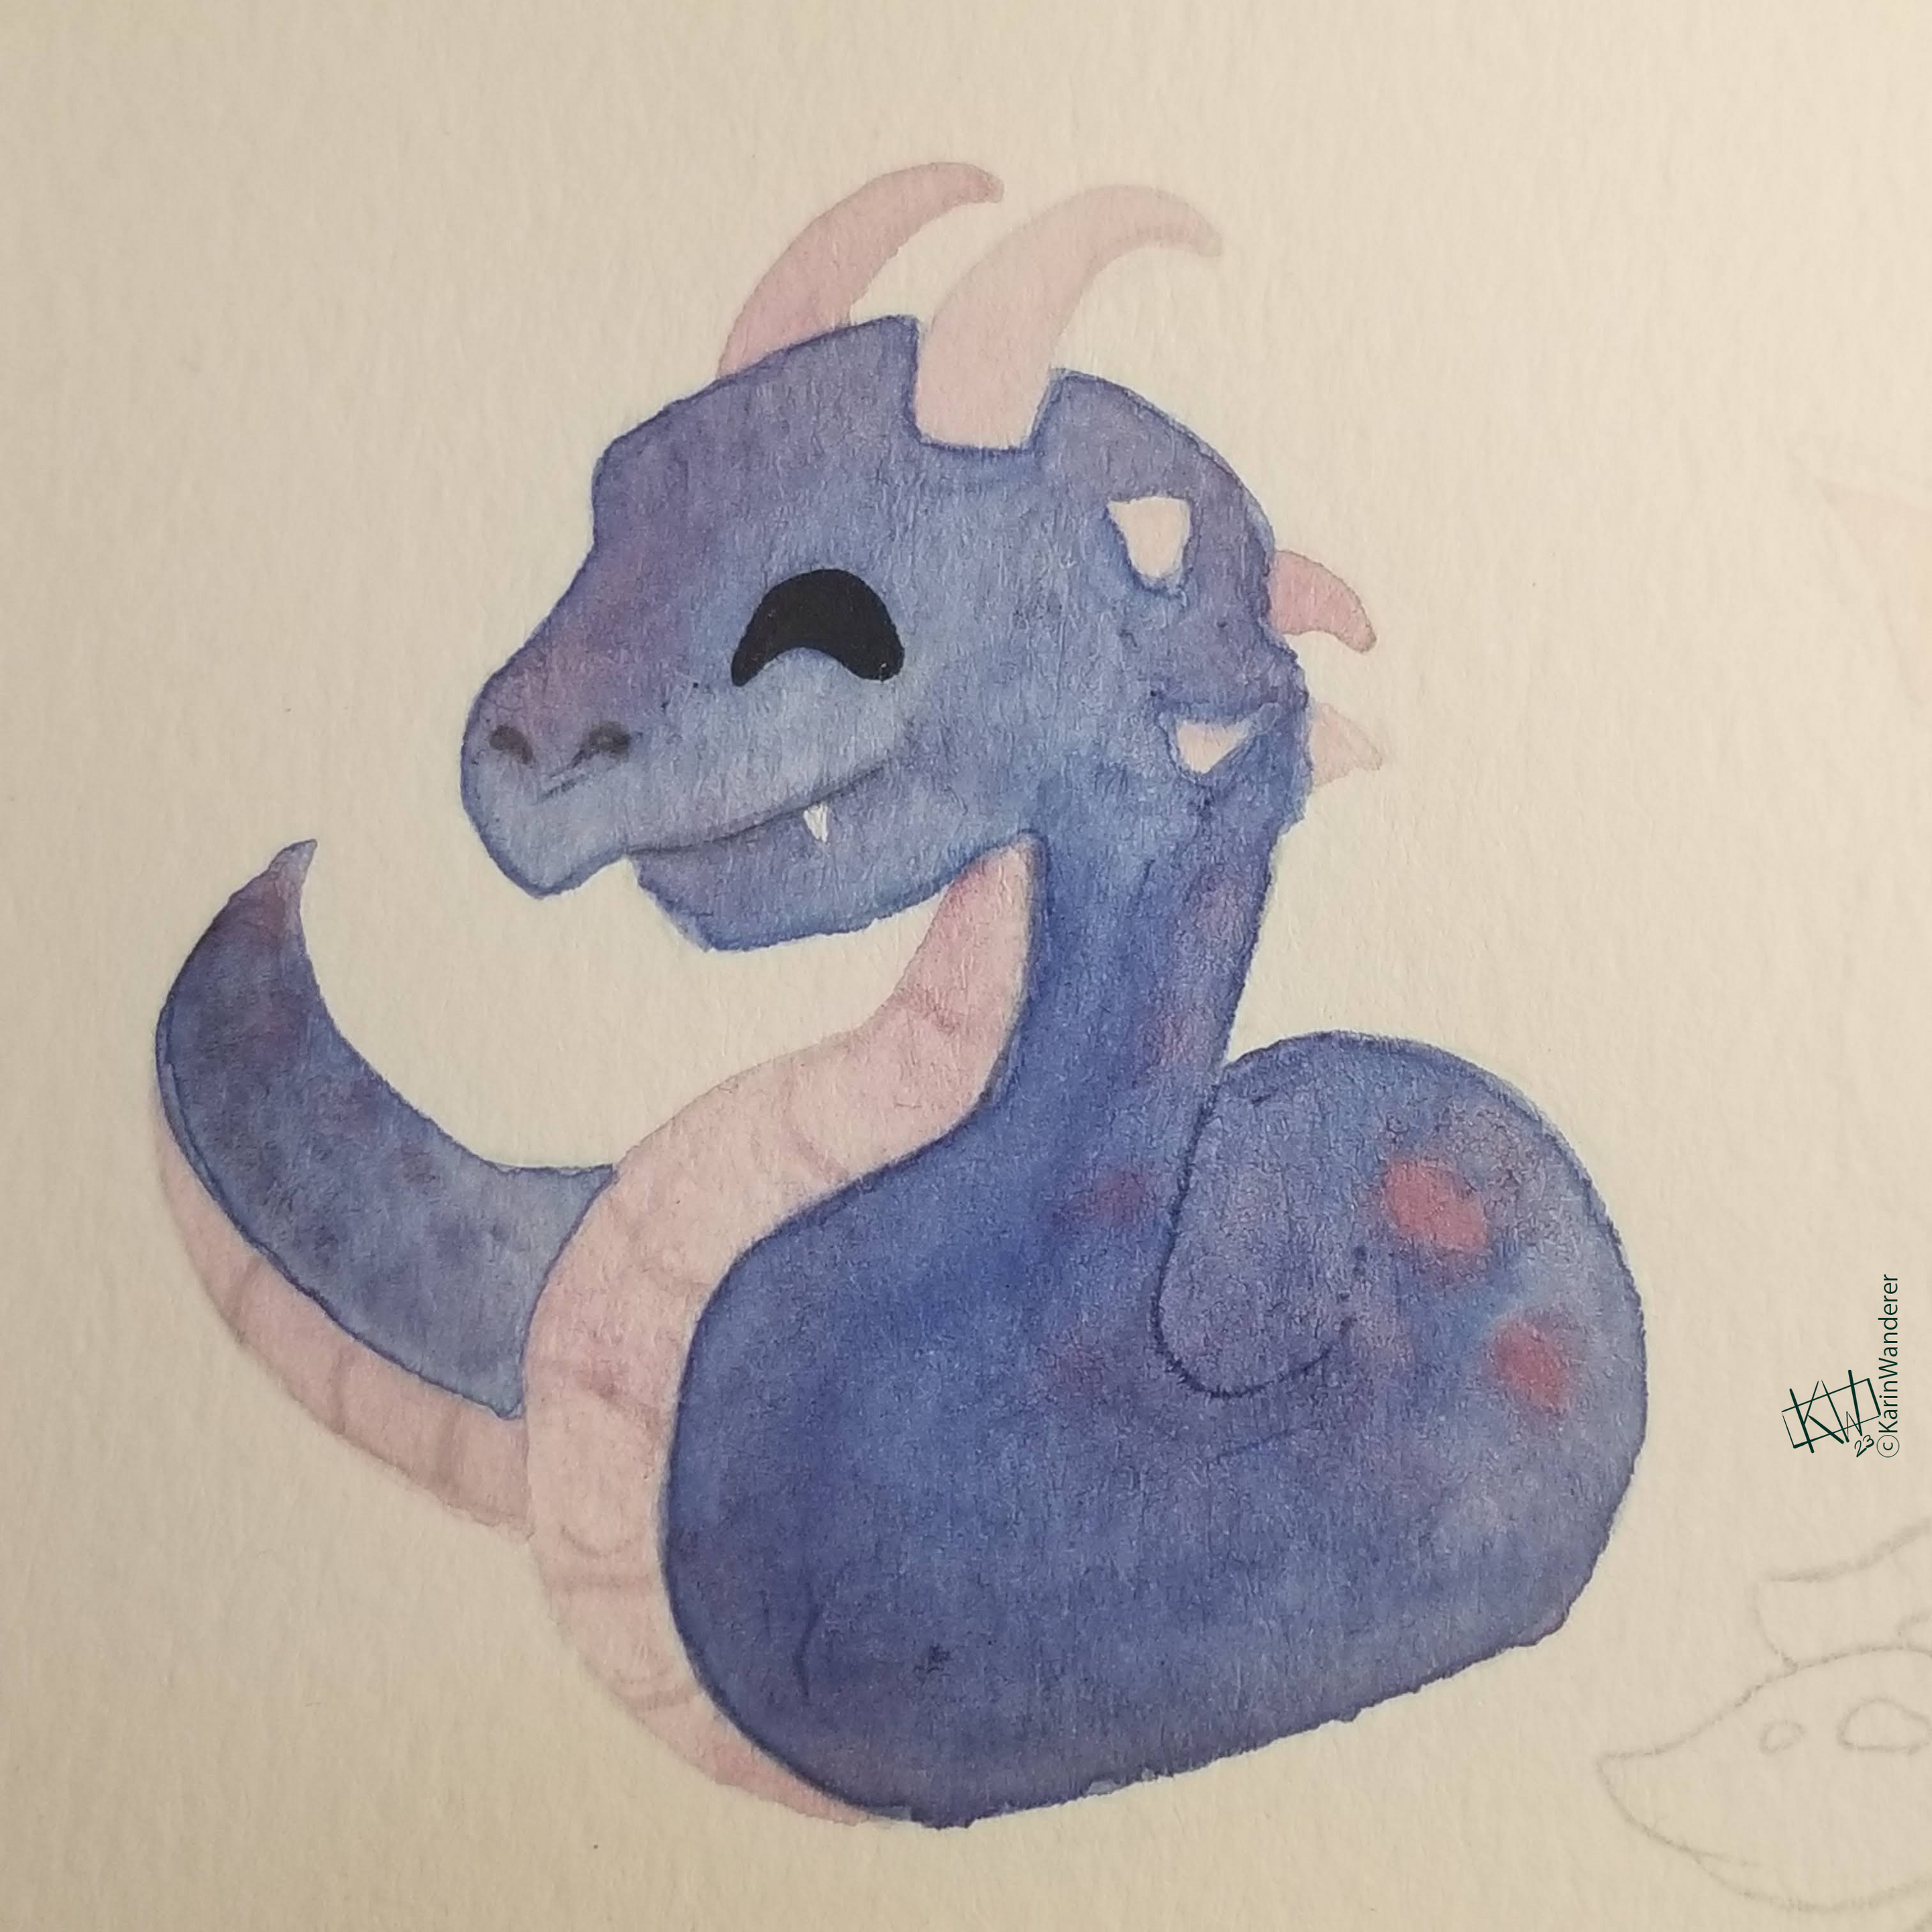 Watercolor of an adorable blue-purple-pink basilisk, smiling contentedly